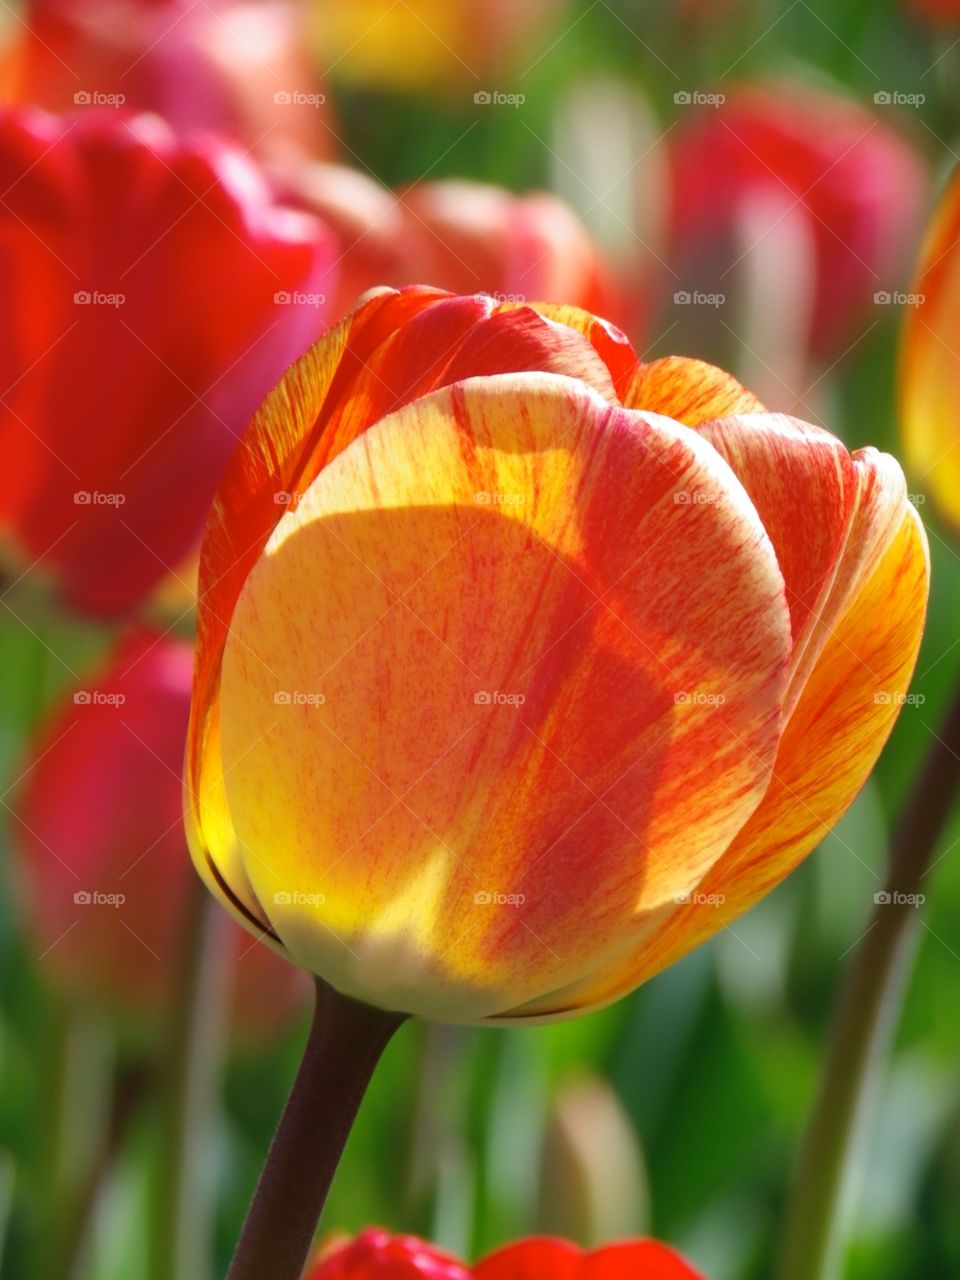 Sunny Tulips. Closeup of a yellow and red tulip in a sun drenched garden